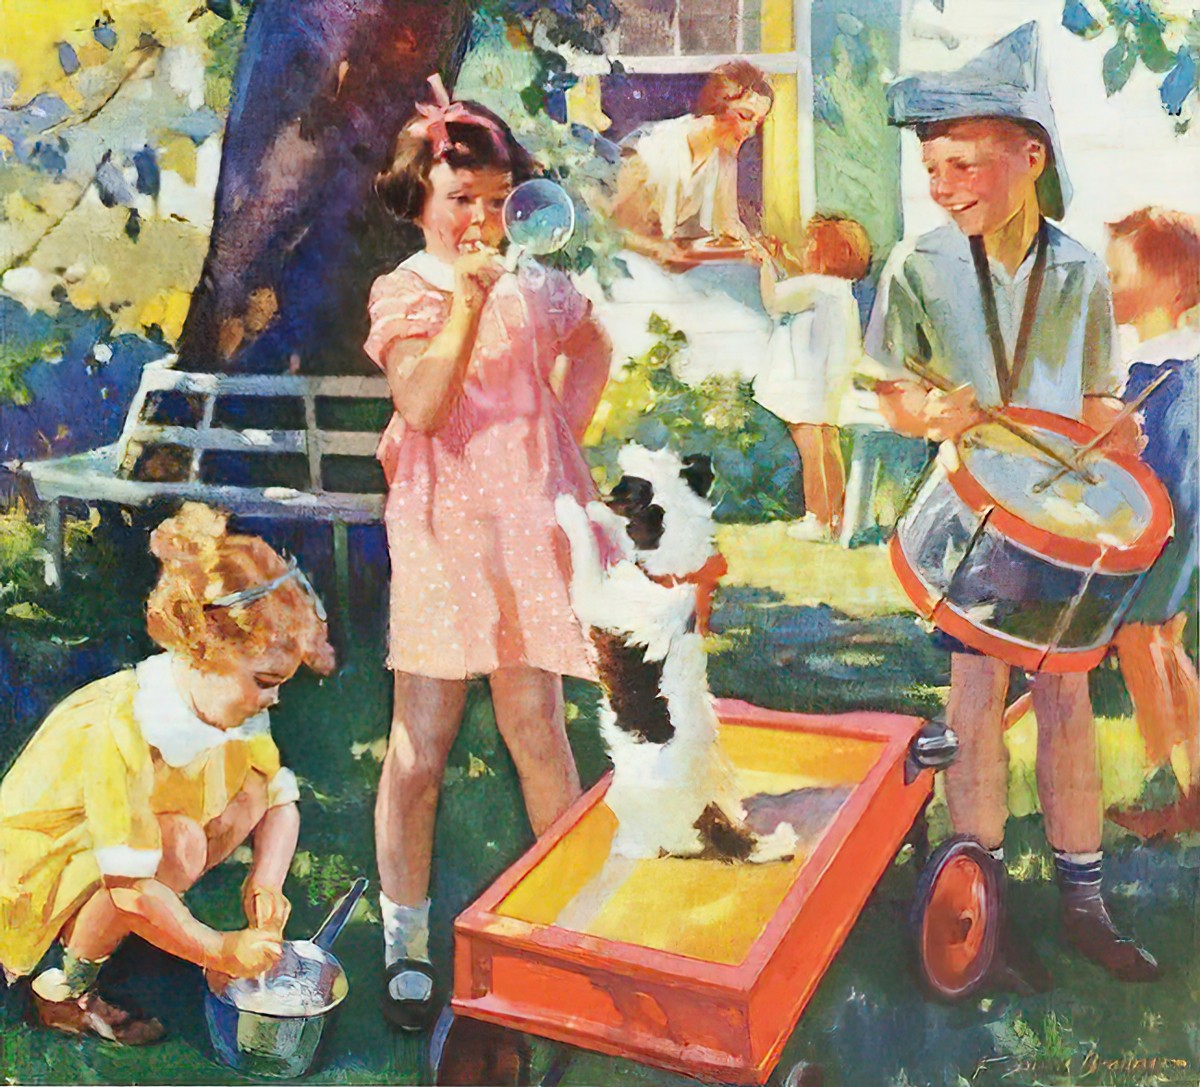 COUNTRY GENTLEMAN Magazine July 1935  blowing bubbles